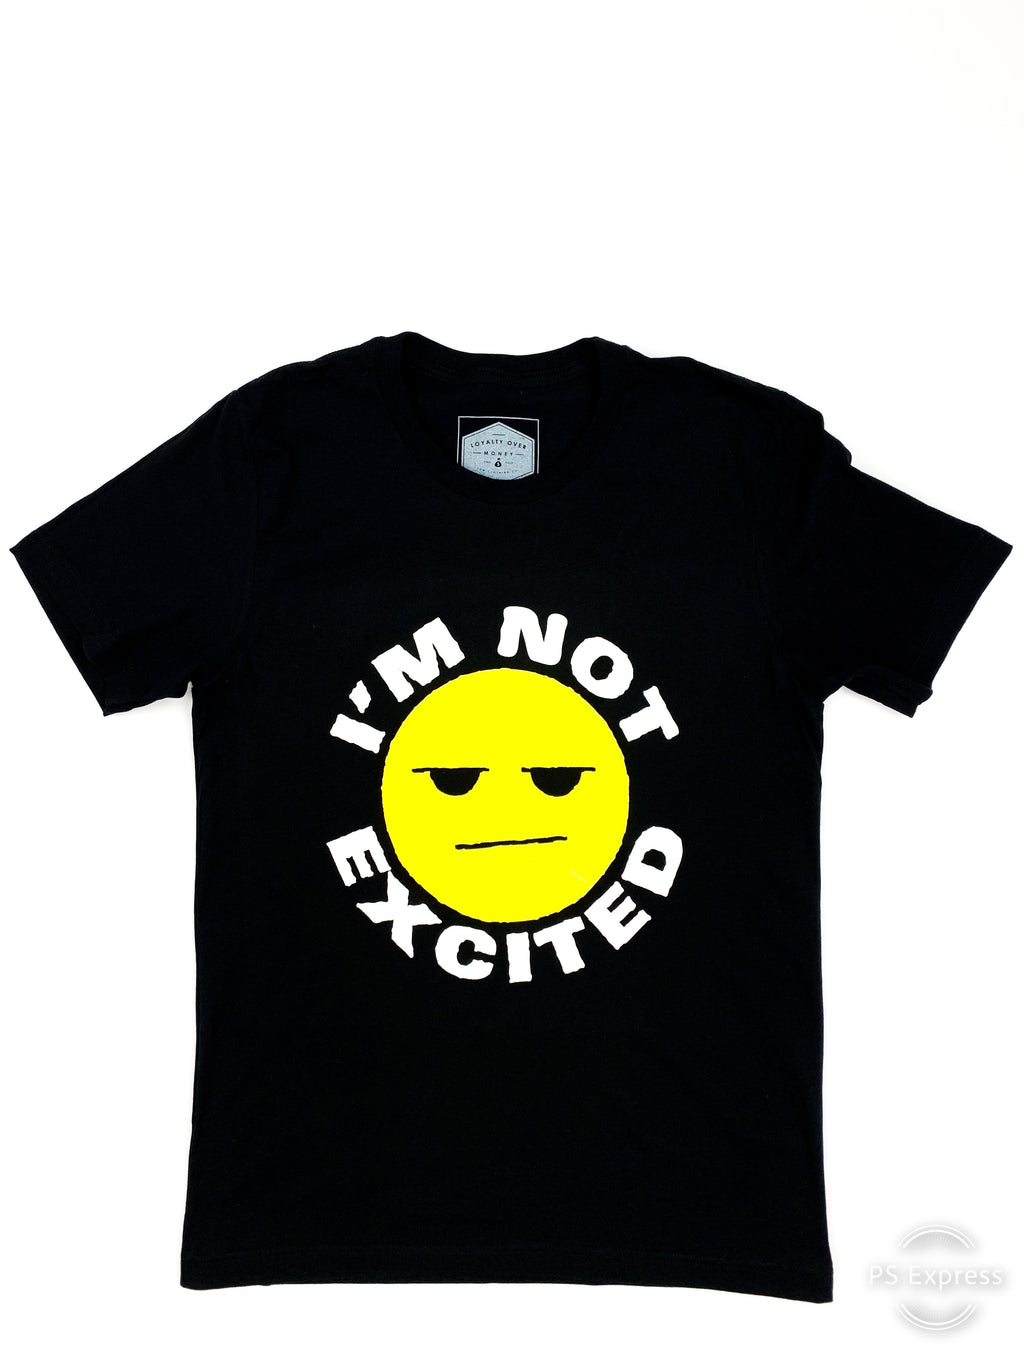 IM NOT EXCITED T SHIRT